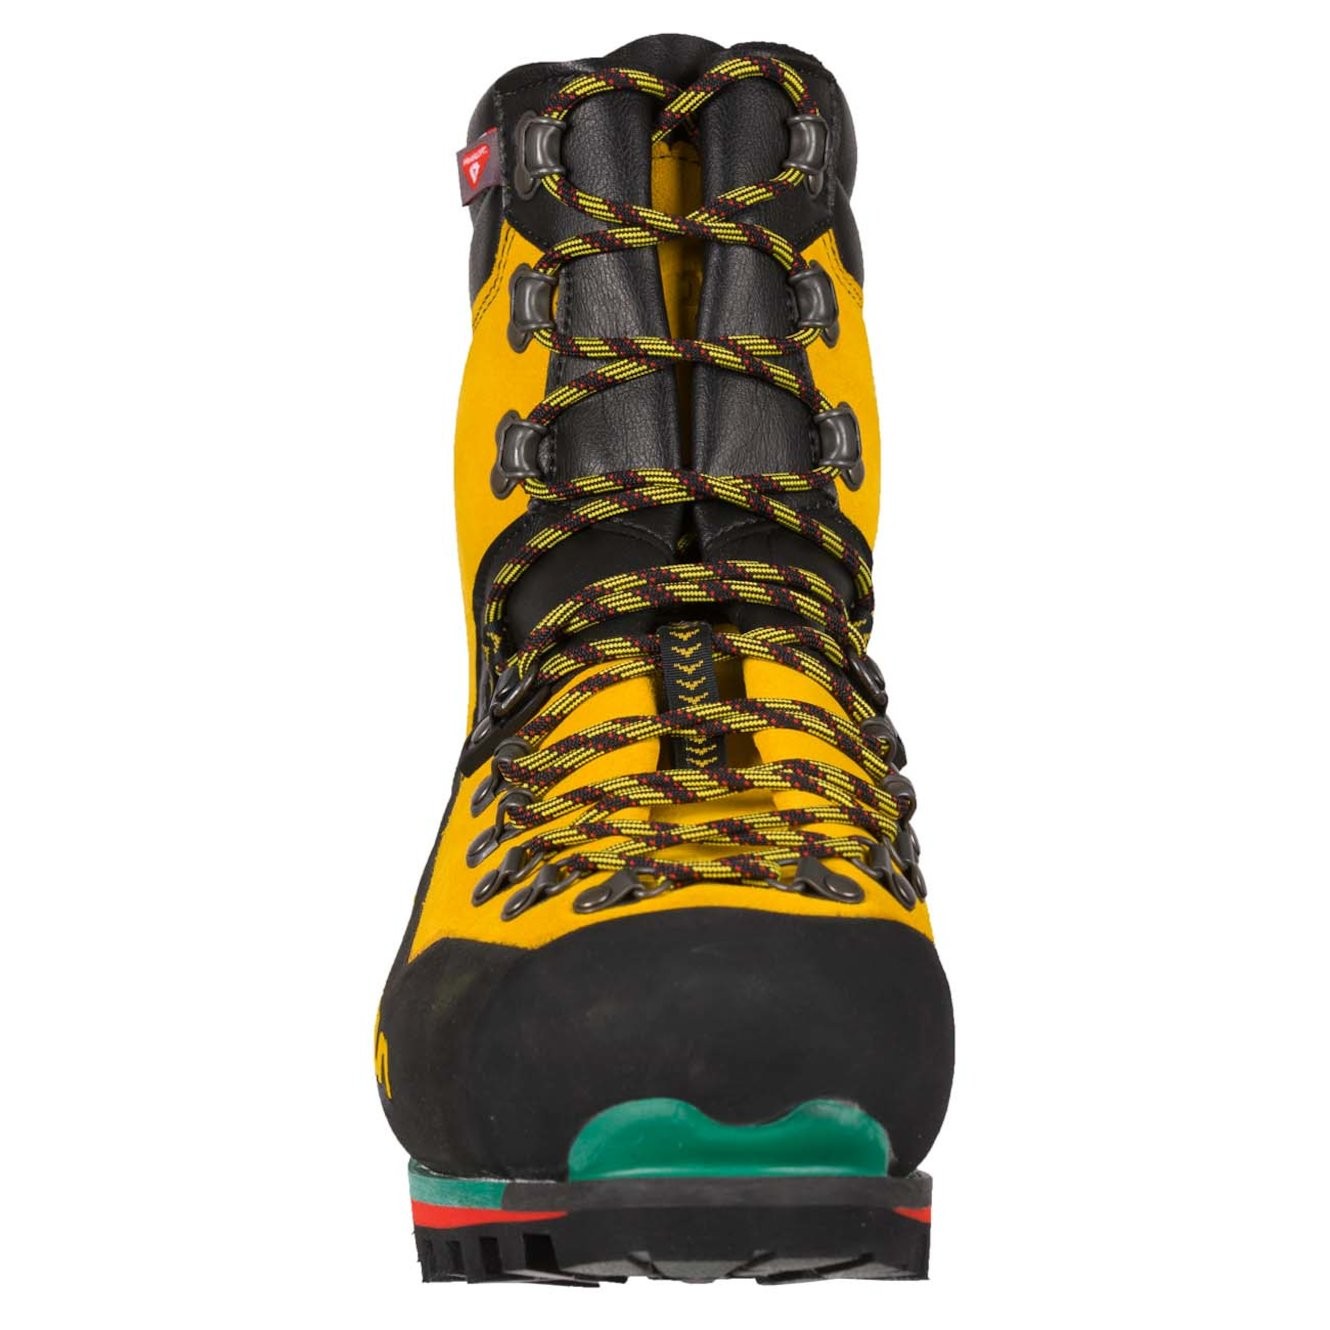 Side of La Sportiva Nepal Extreme in Black & Yellow